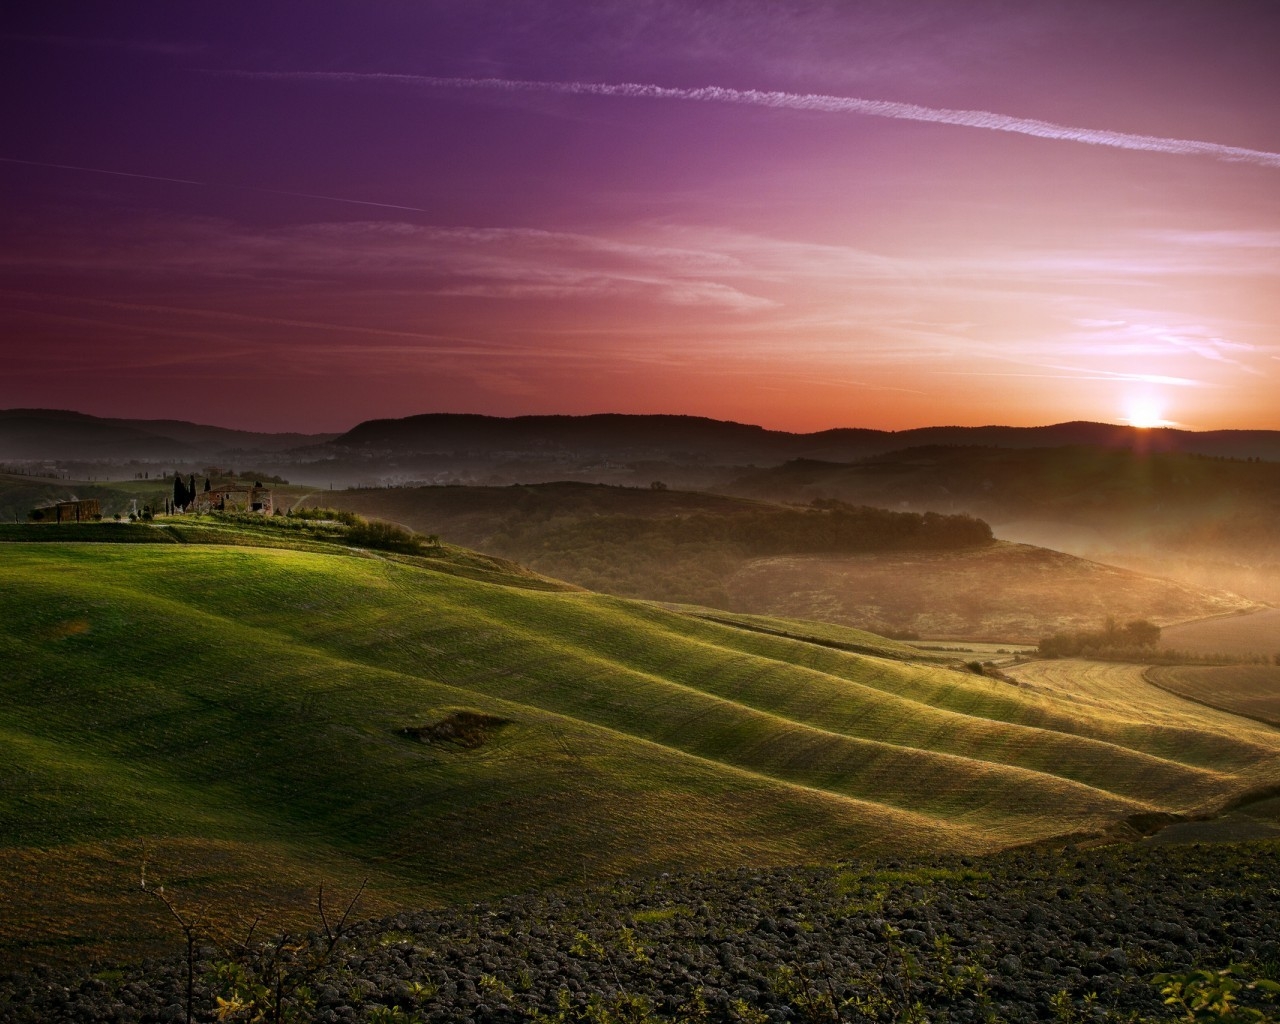 Sunset in Tuscany for 1280 x 1024 resolution